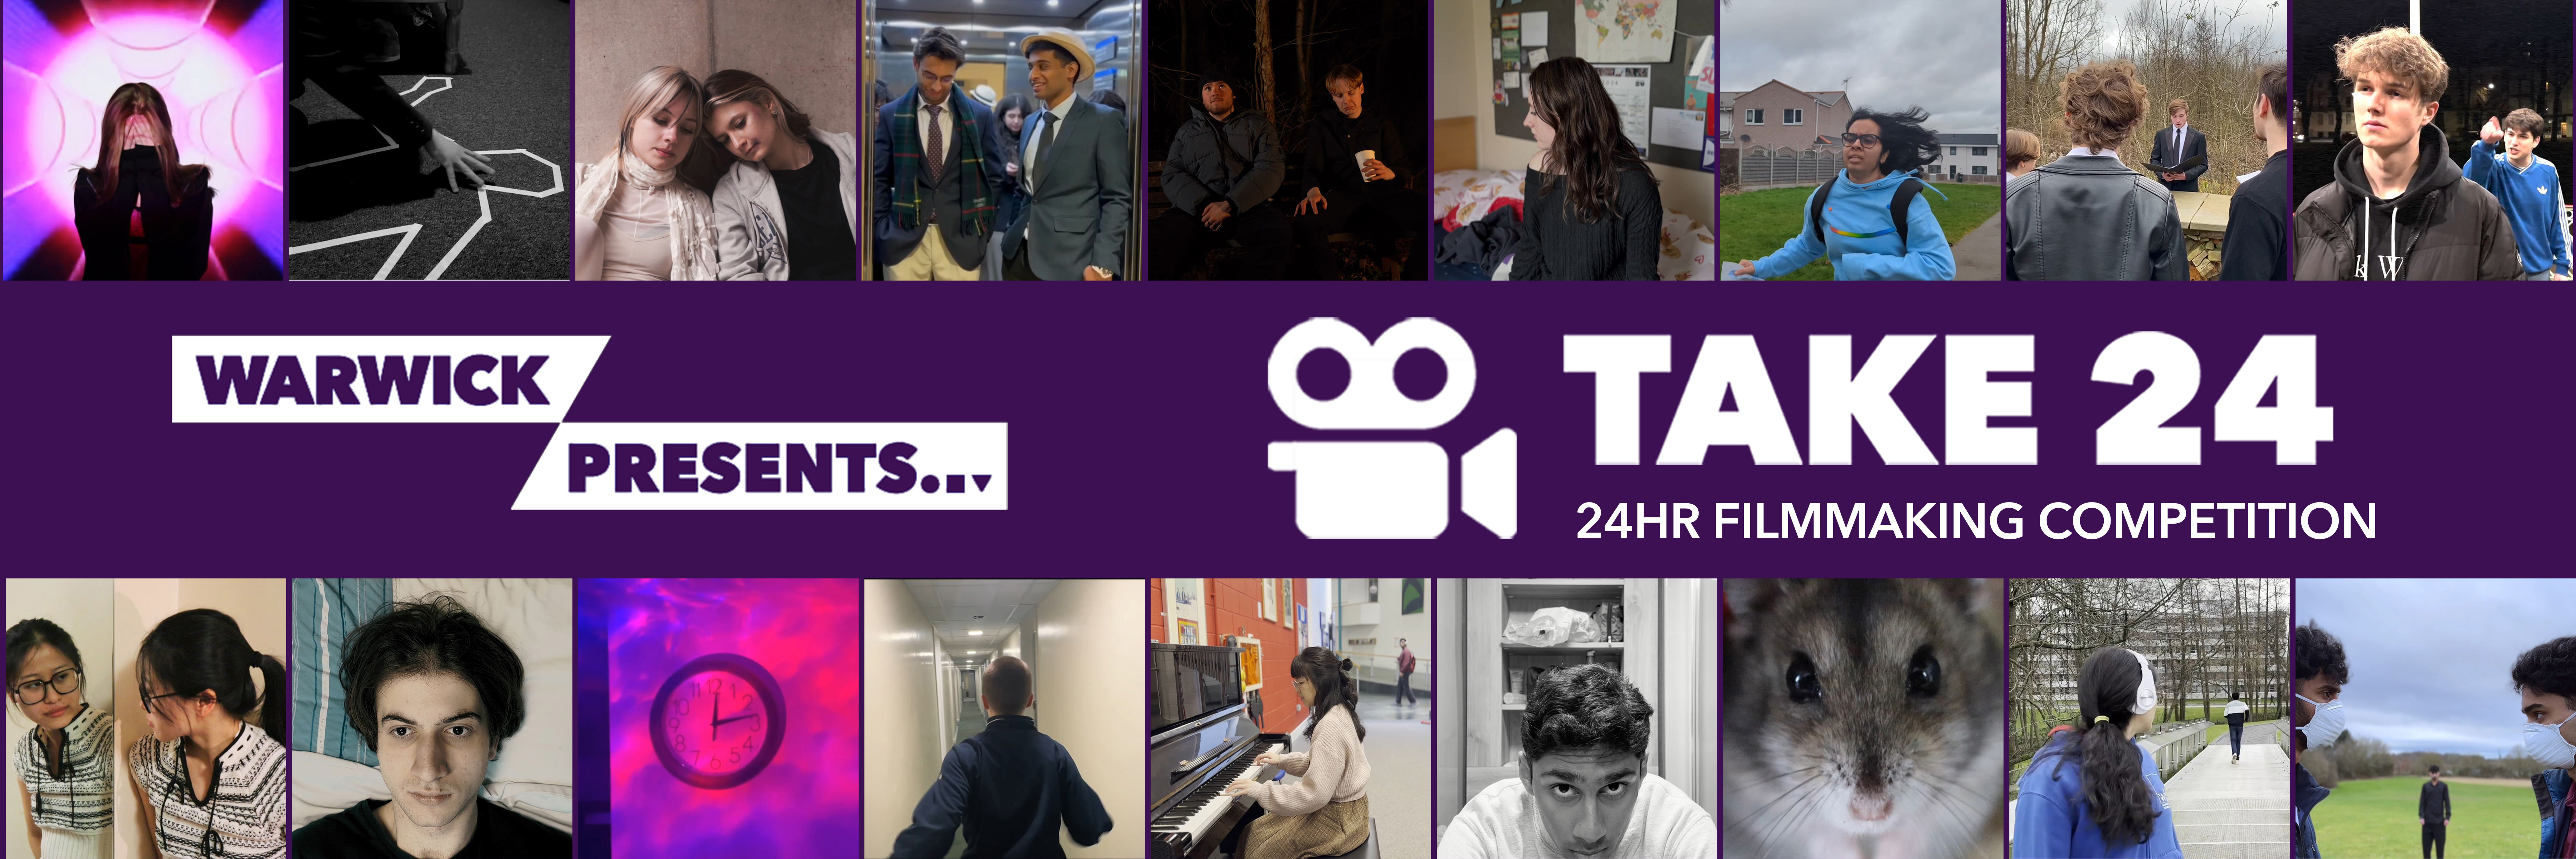 Warwick Presents Take 24: "4 Hour Filmmaking Competition